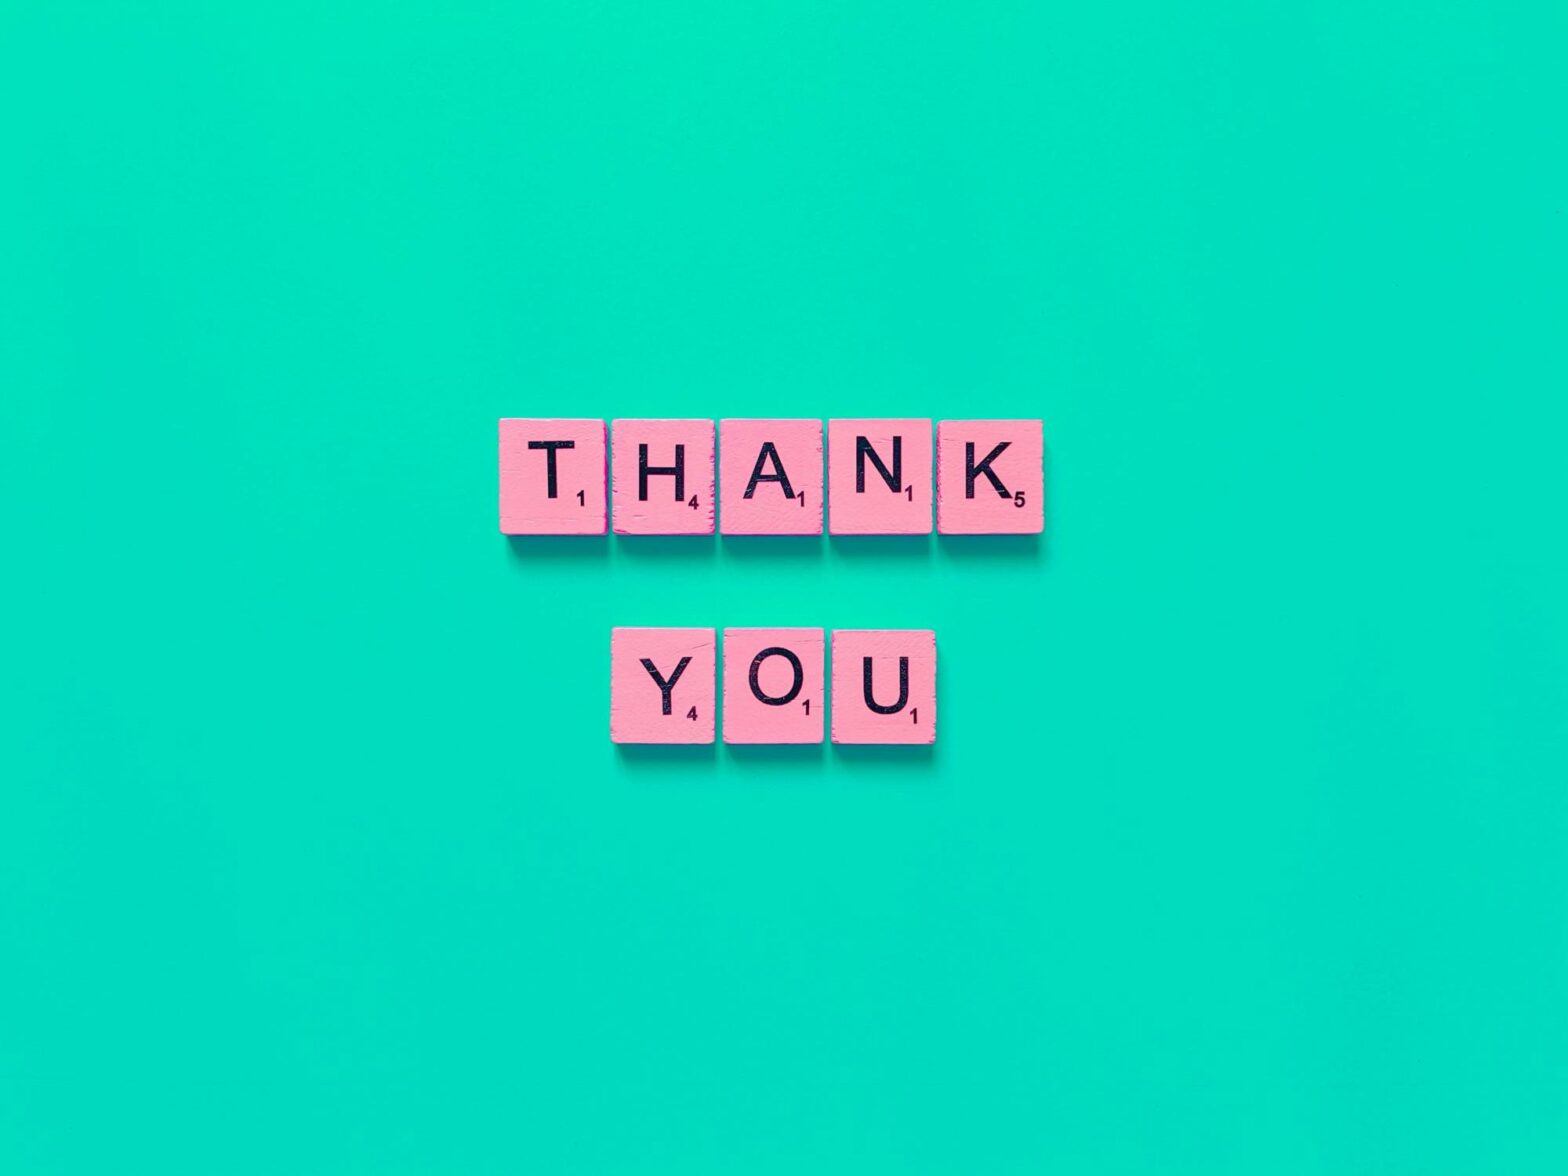 pink scramble pieces spelling thank you against green background to symbolizing saying thank you for your order